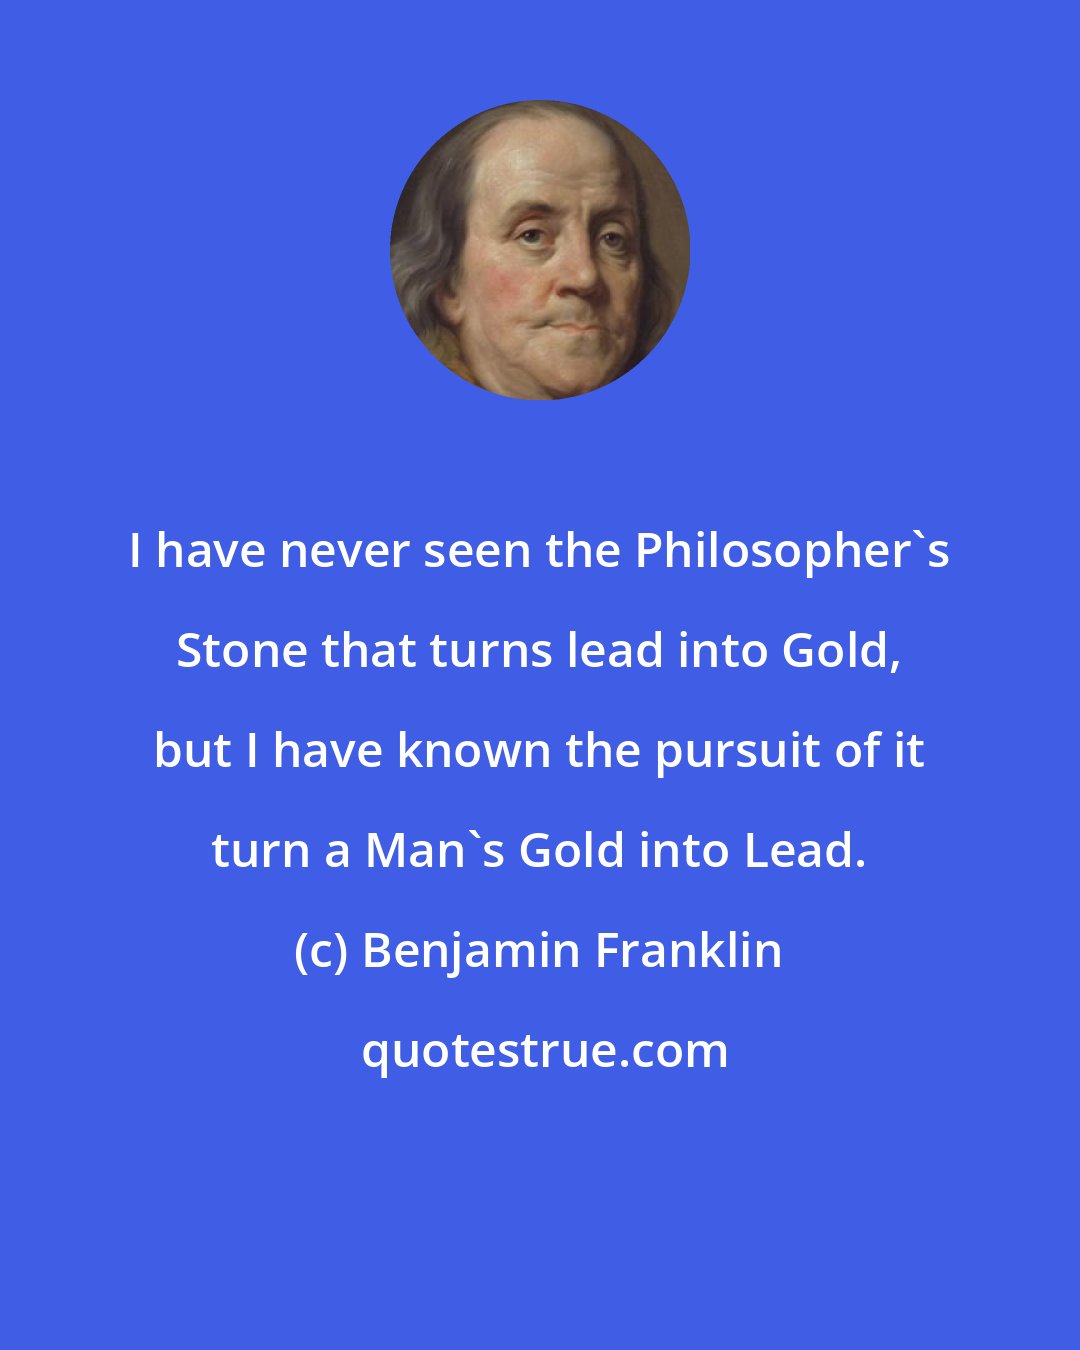 Benjamin Franklin: I have never seen the Philosopher's Stone that turns lead into Gold, but I have known the pursuit of it turn a Man's Gold into Lead.